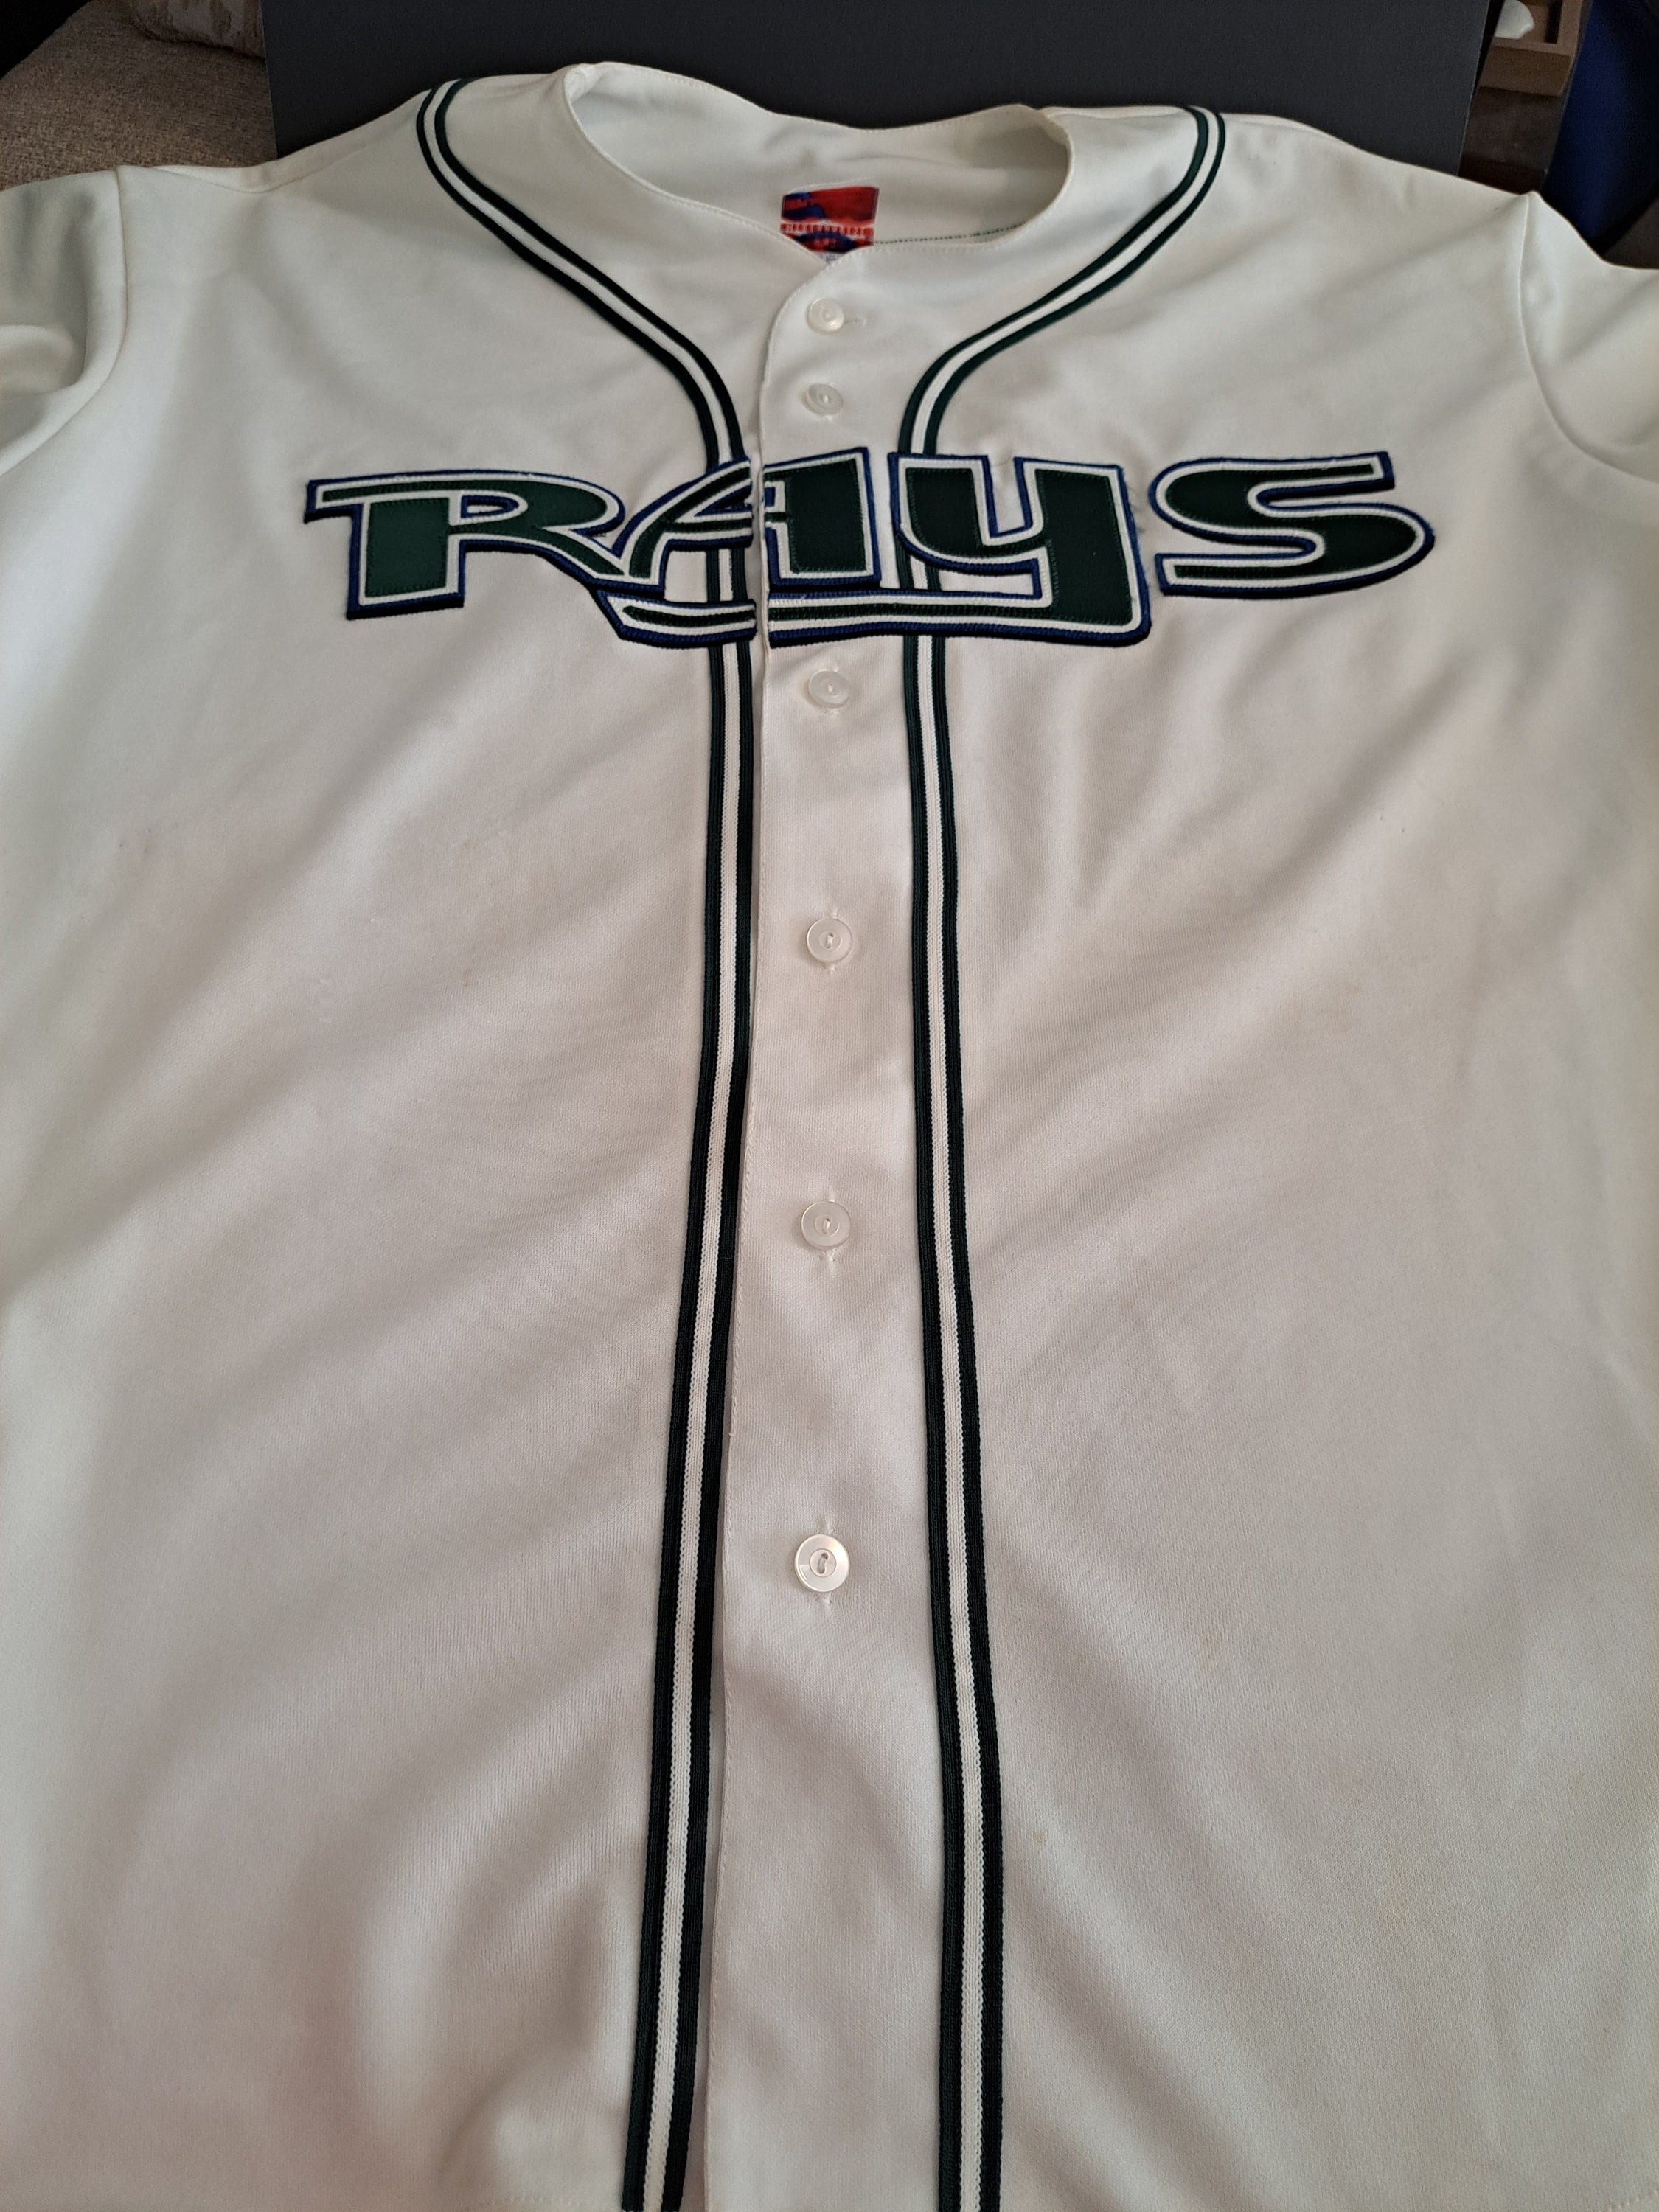 tampa bay devil rays jersey for sale